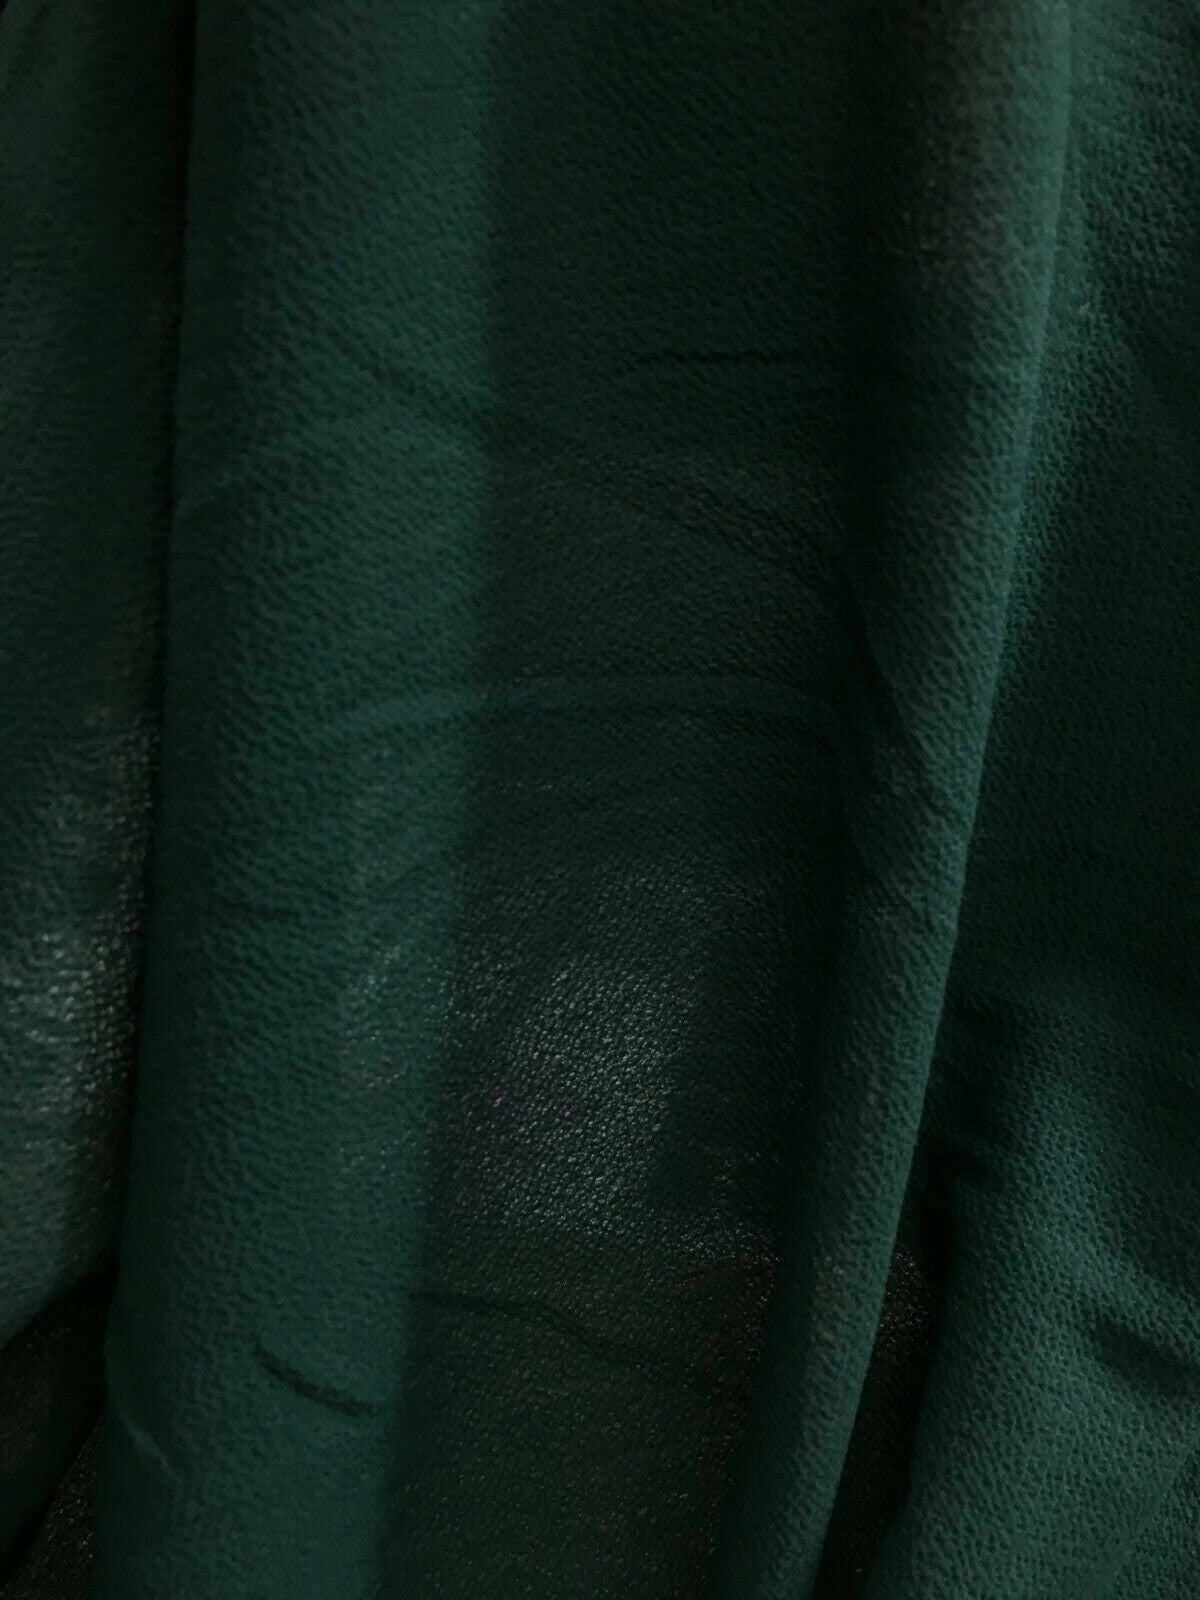 TEAL GREEN Bubble Crepe Georgette Fabric (60 in.) Sold By The Yard